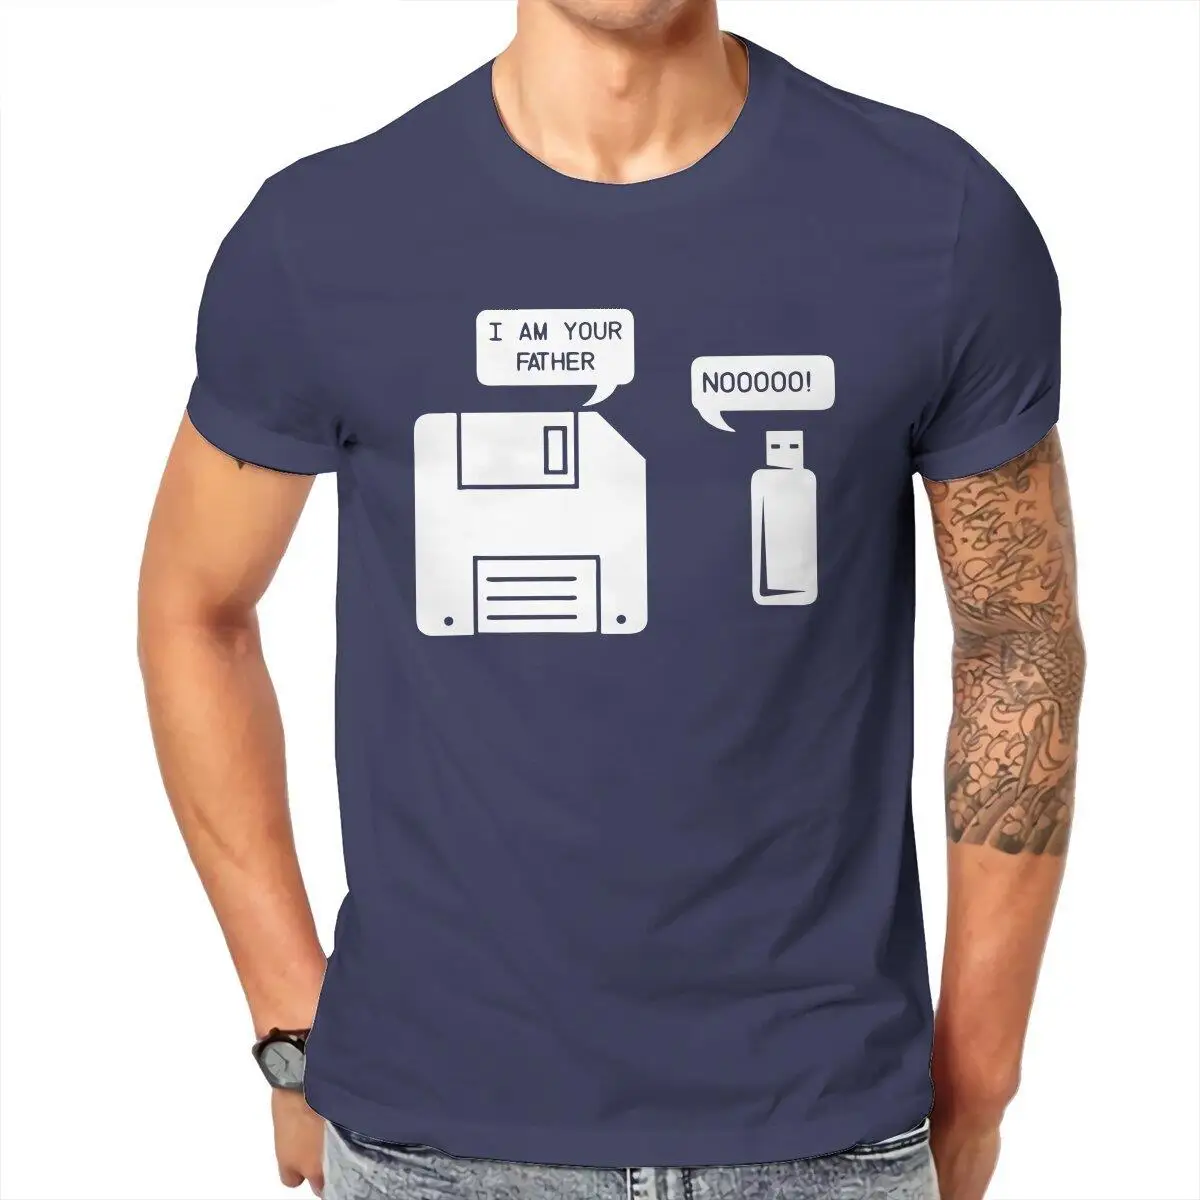 USB Floppy Disk  Men T Shirts I Am Your Father Geek Unique Tee Shirt Short Sleeve Round Neck T-Shirts Cotton Adult Tops